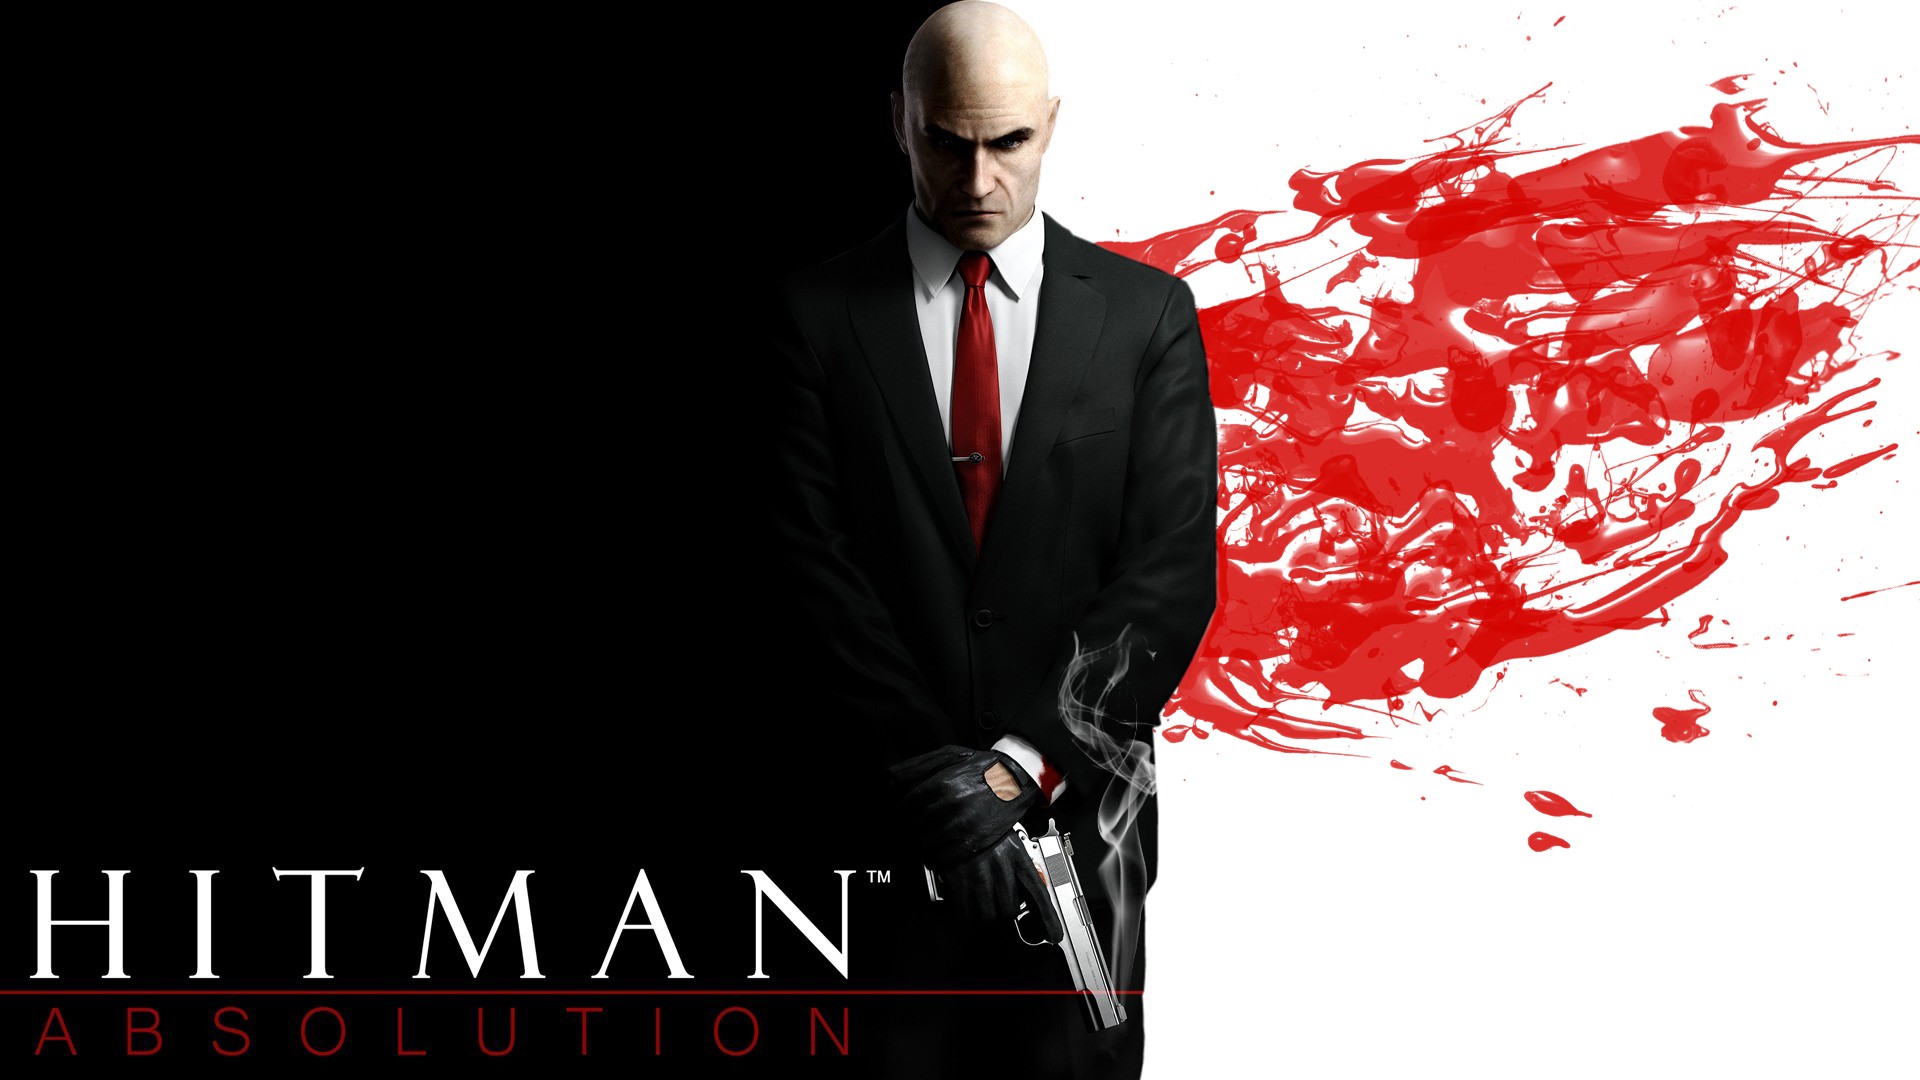 General 1920x1080 Hitman: Absolution Agent 47 blood red red tie video games PC gaming video game man antiheroes gun weapon